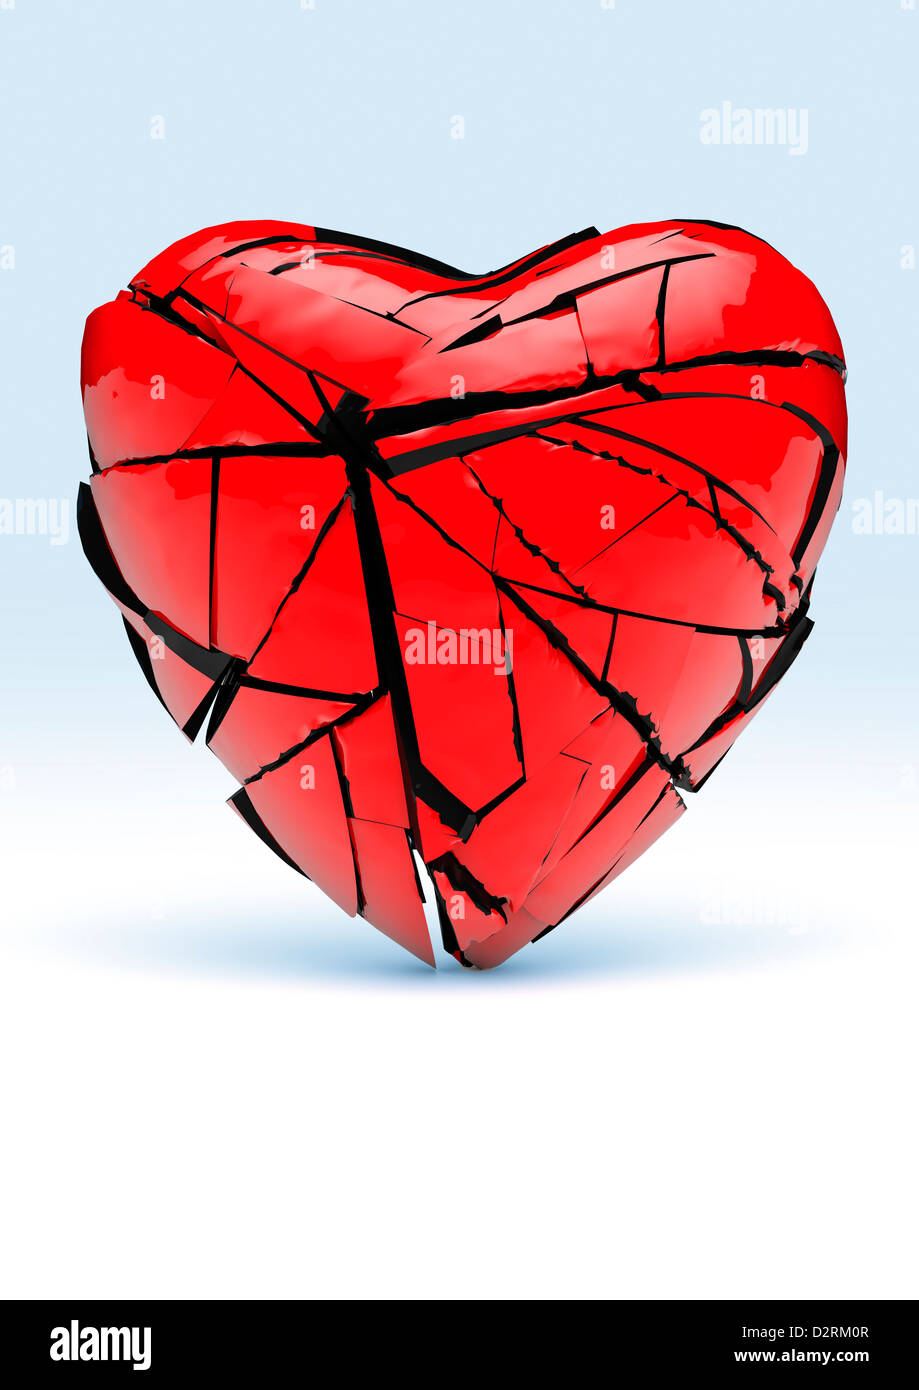 Red Love Heart Cracking And Breaking Into Pieces Light Blue Background Concept Image Stock Photo Alamy